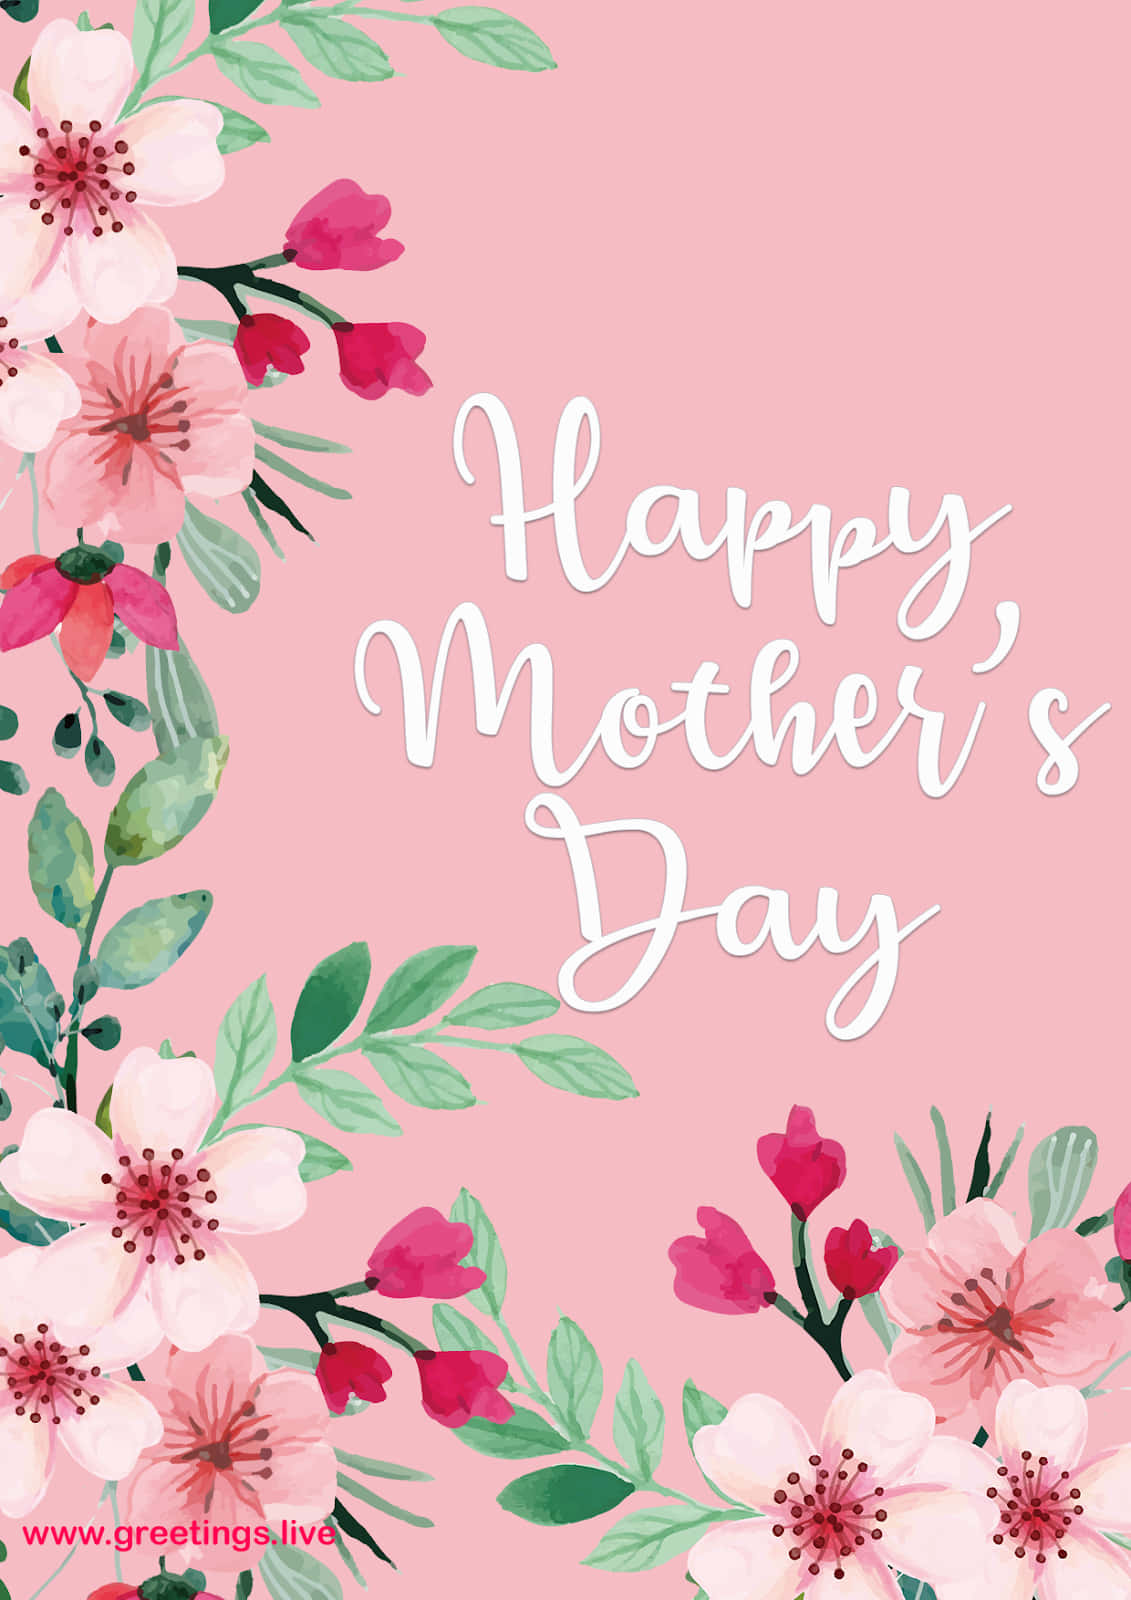 Download Happy Mother's Day Images | Wallpapers.com